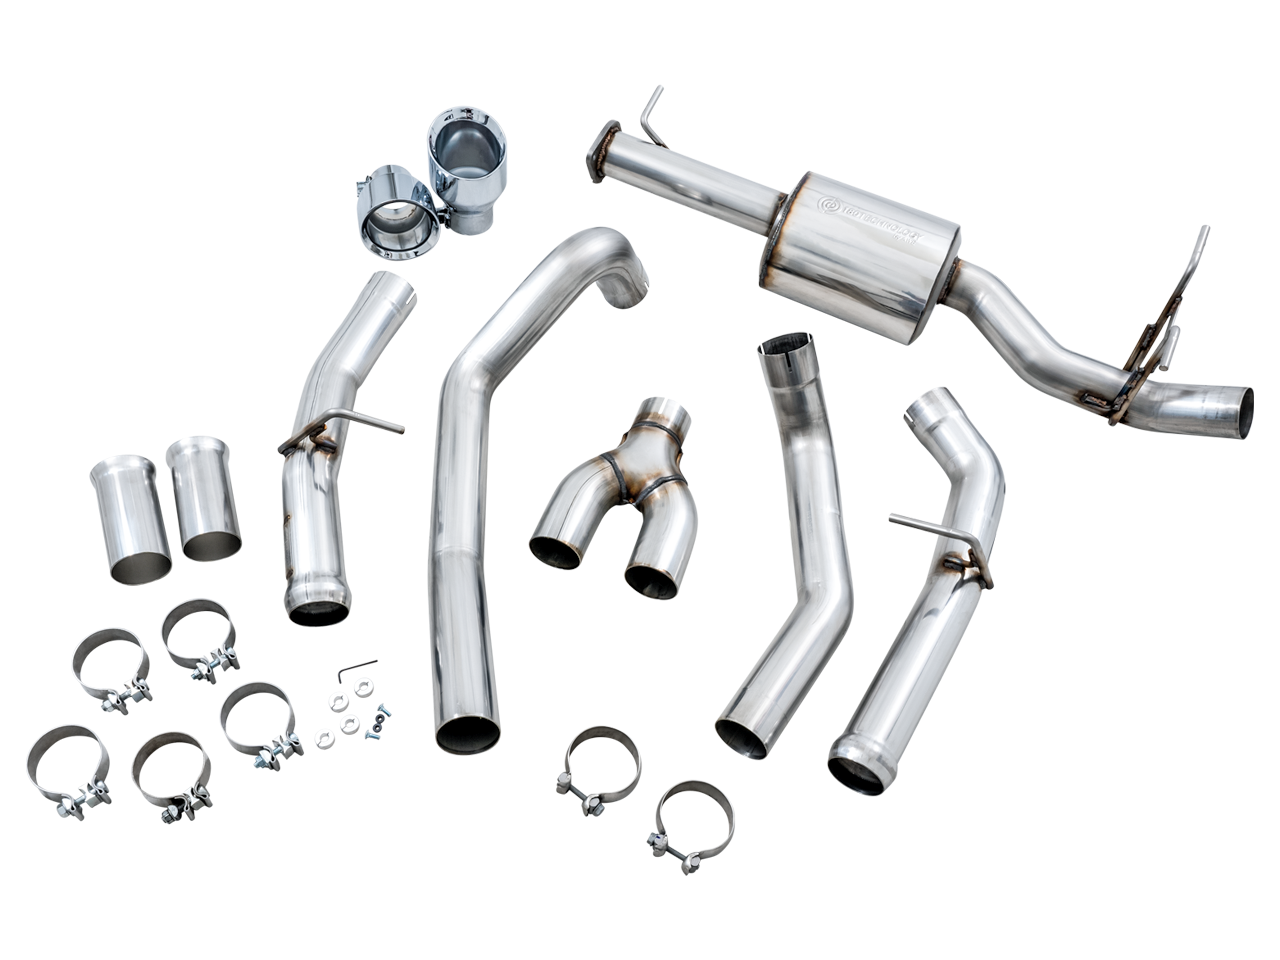 AWE 0FG Dual Rear Exit Catback Exhaust for 5th Gen RAM 1500 5.7L (with bumper cutouts) - Chrome Silver Tips (3015-32005)